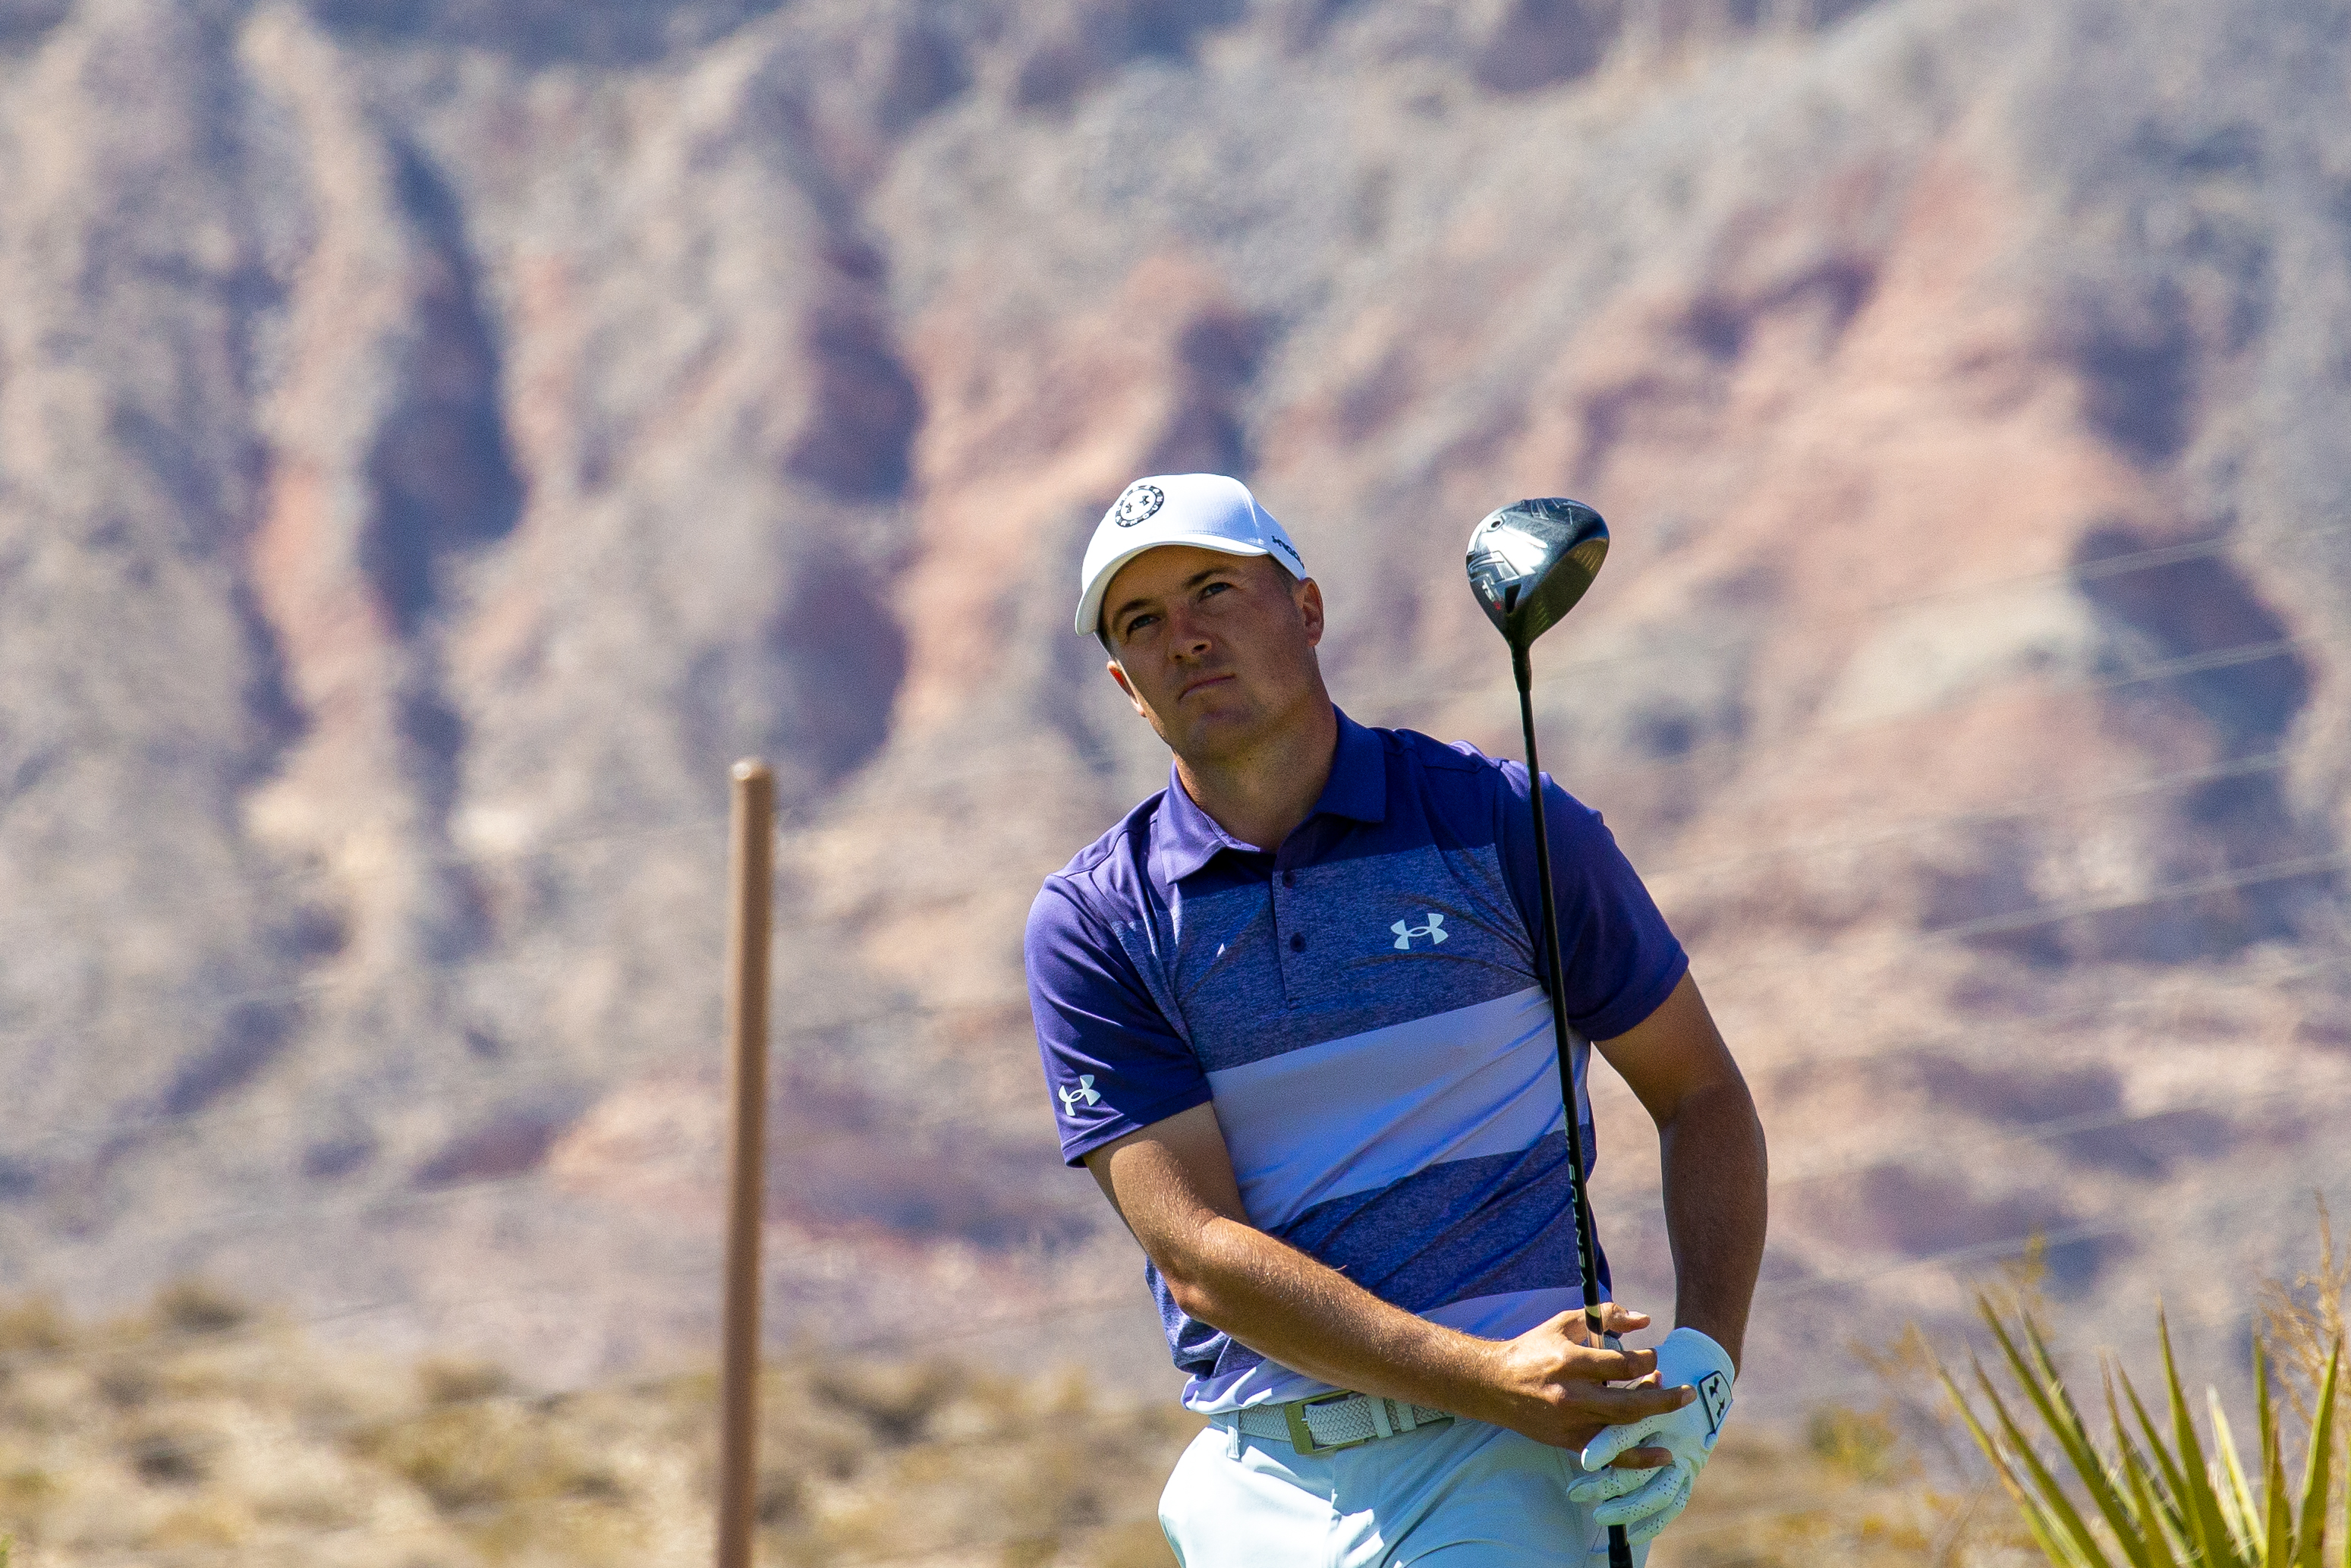 Jordan Spieth climbs back to familiar status in the World Golf Ranking for first time in three years | News and Information GolfDigest.com